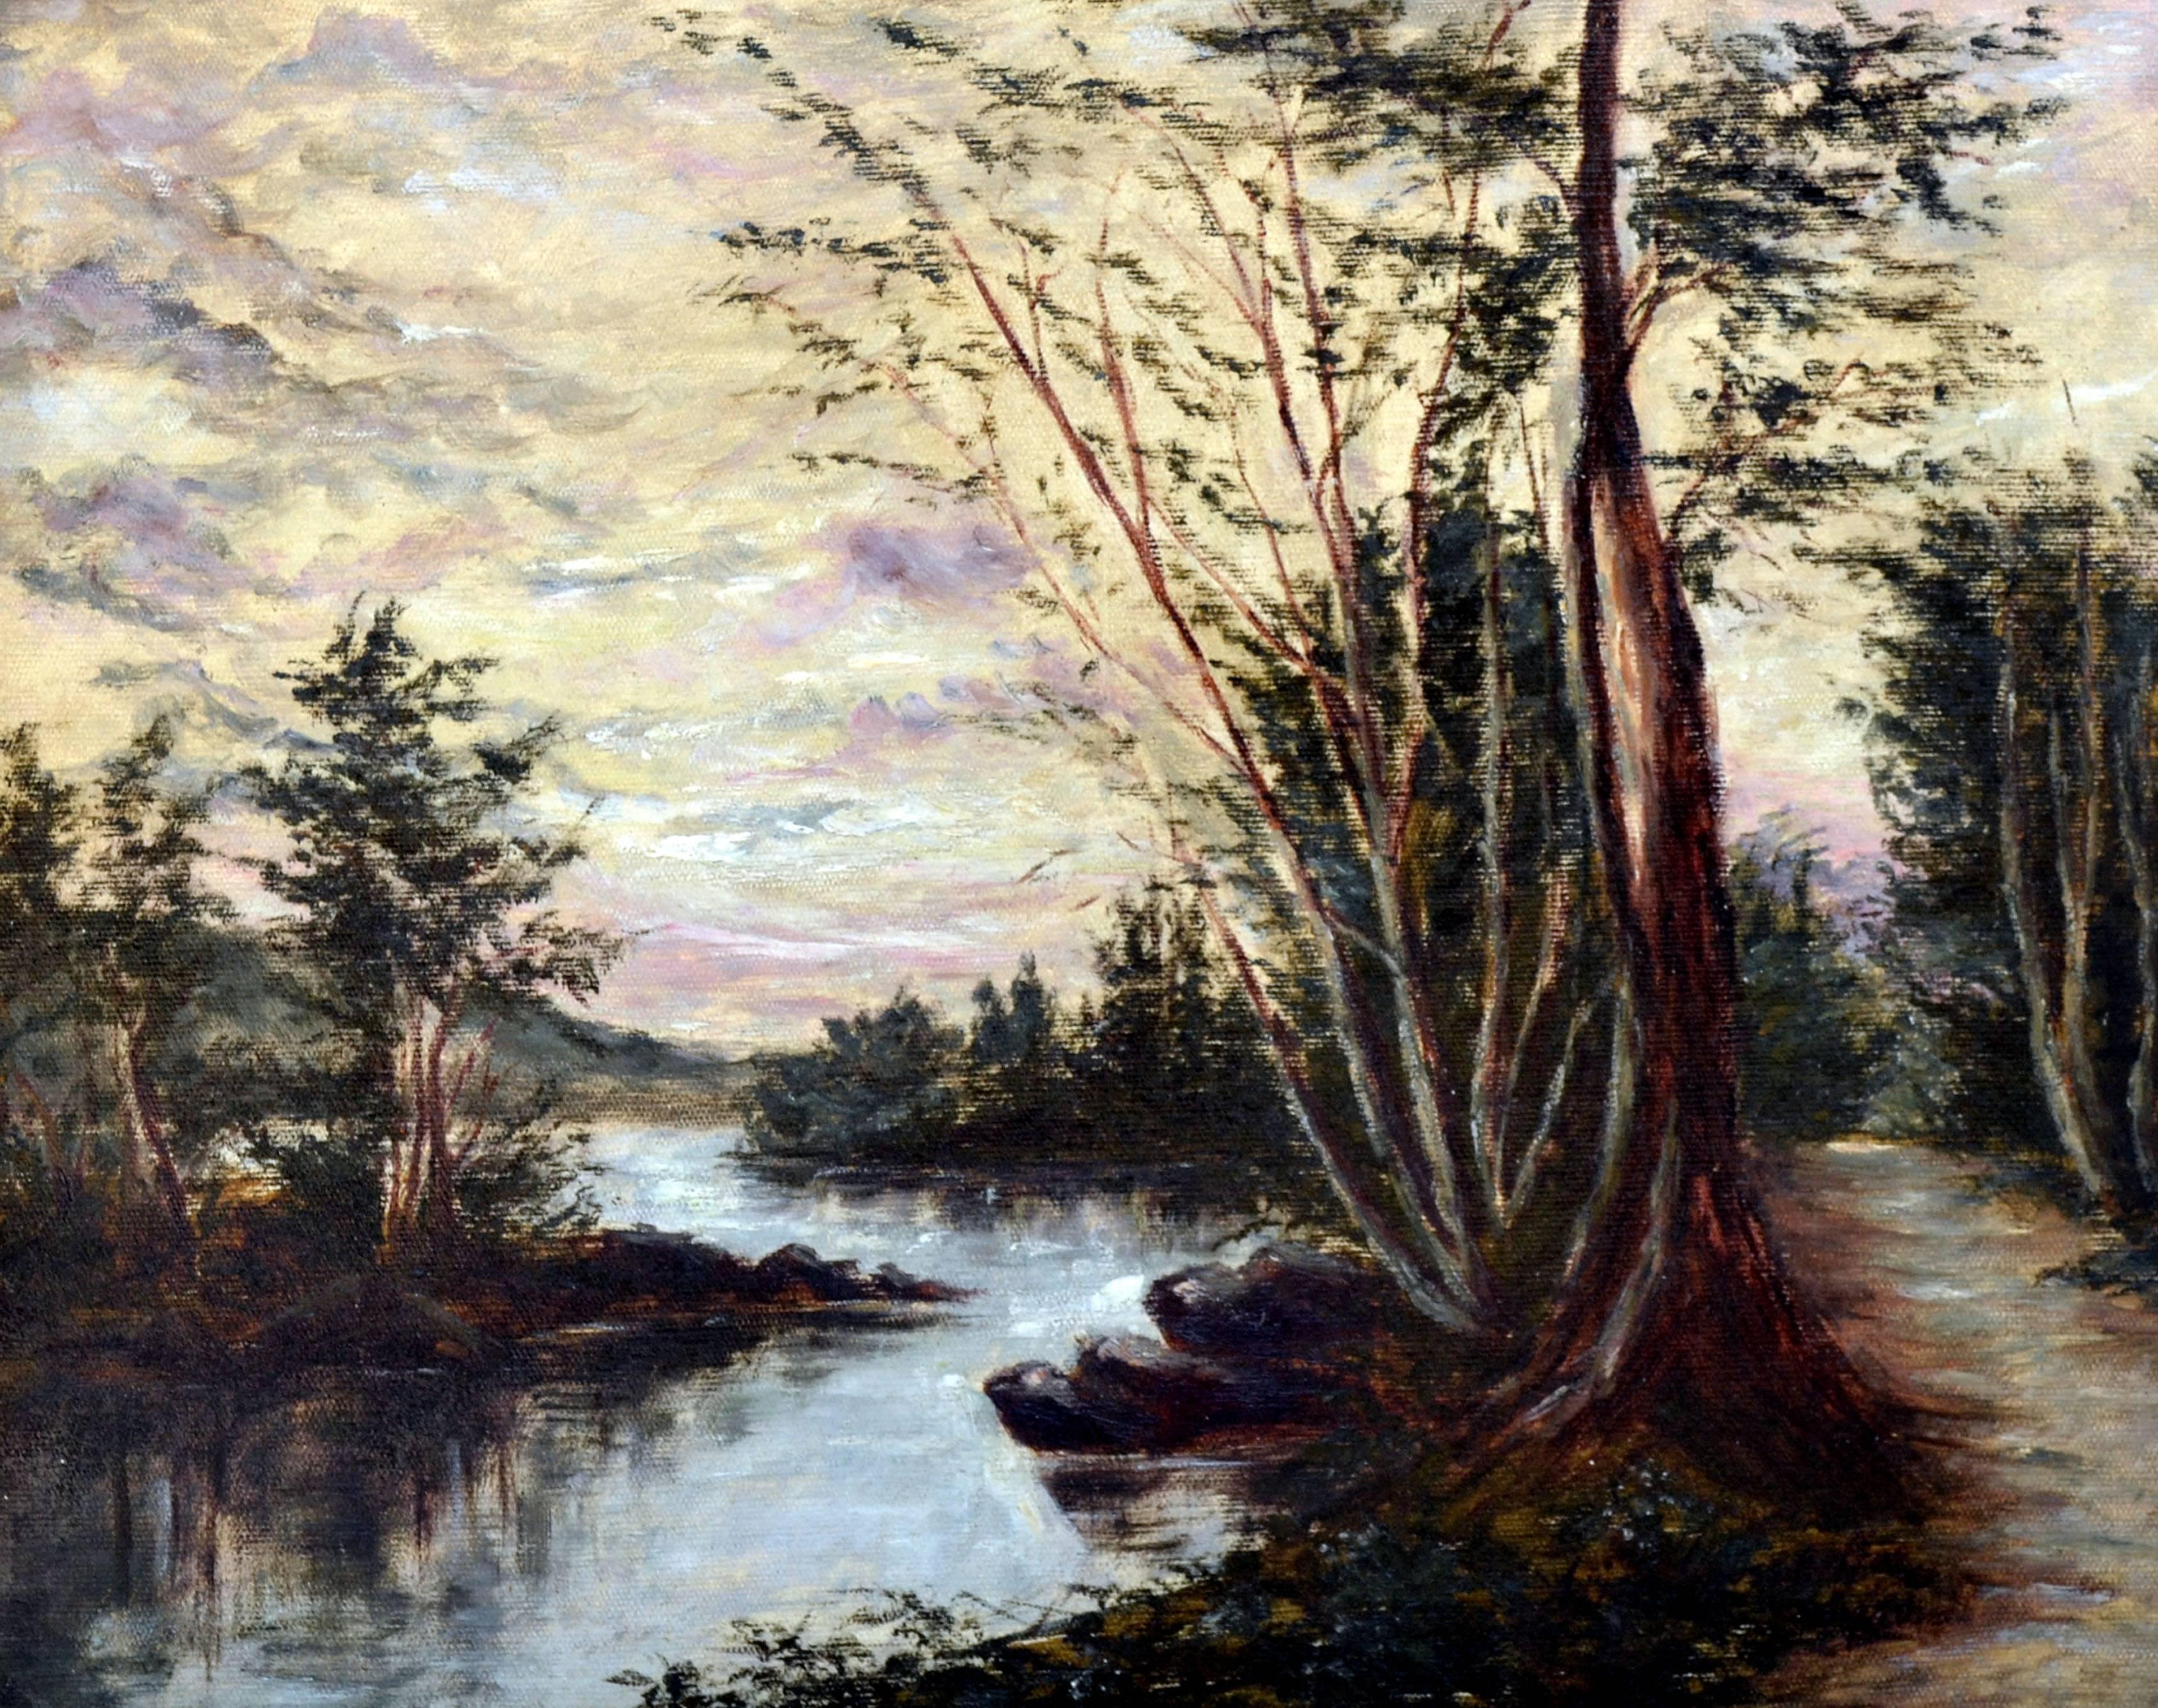 Turn of the Century California Riverbend Landscape - Painting by Alice L. Meussdorffer